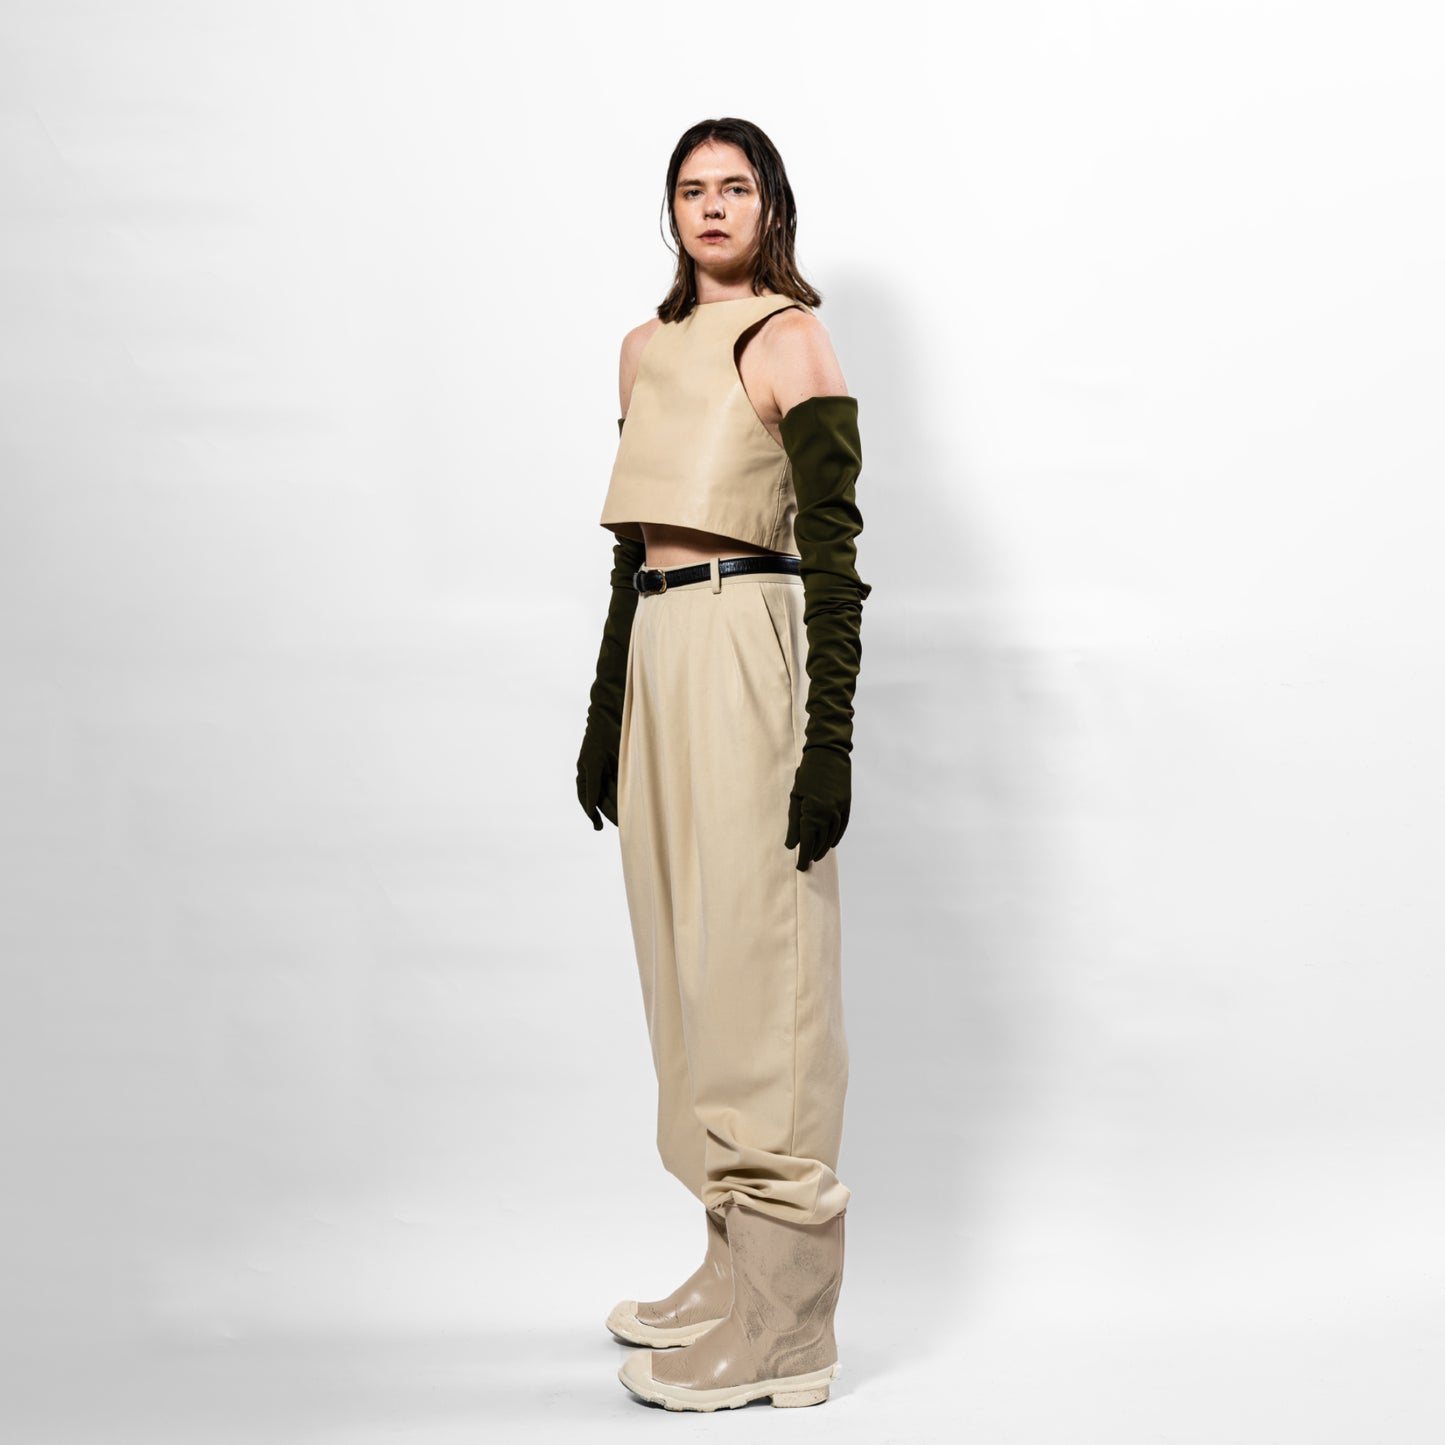 Tulip Pants- Straight Wide leg pants with front pleats